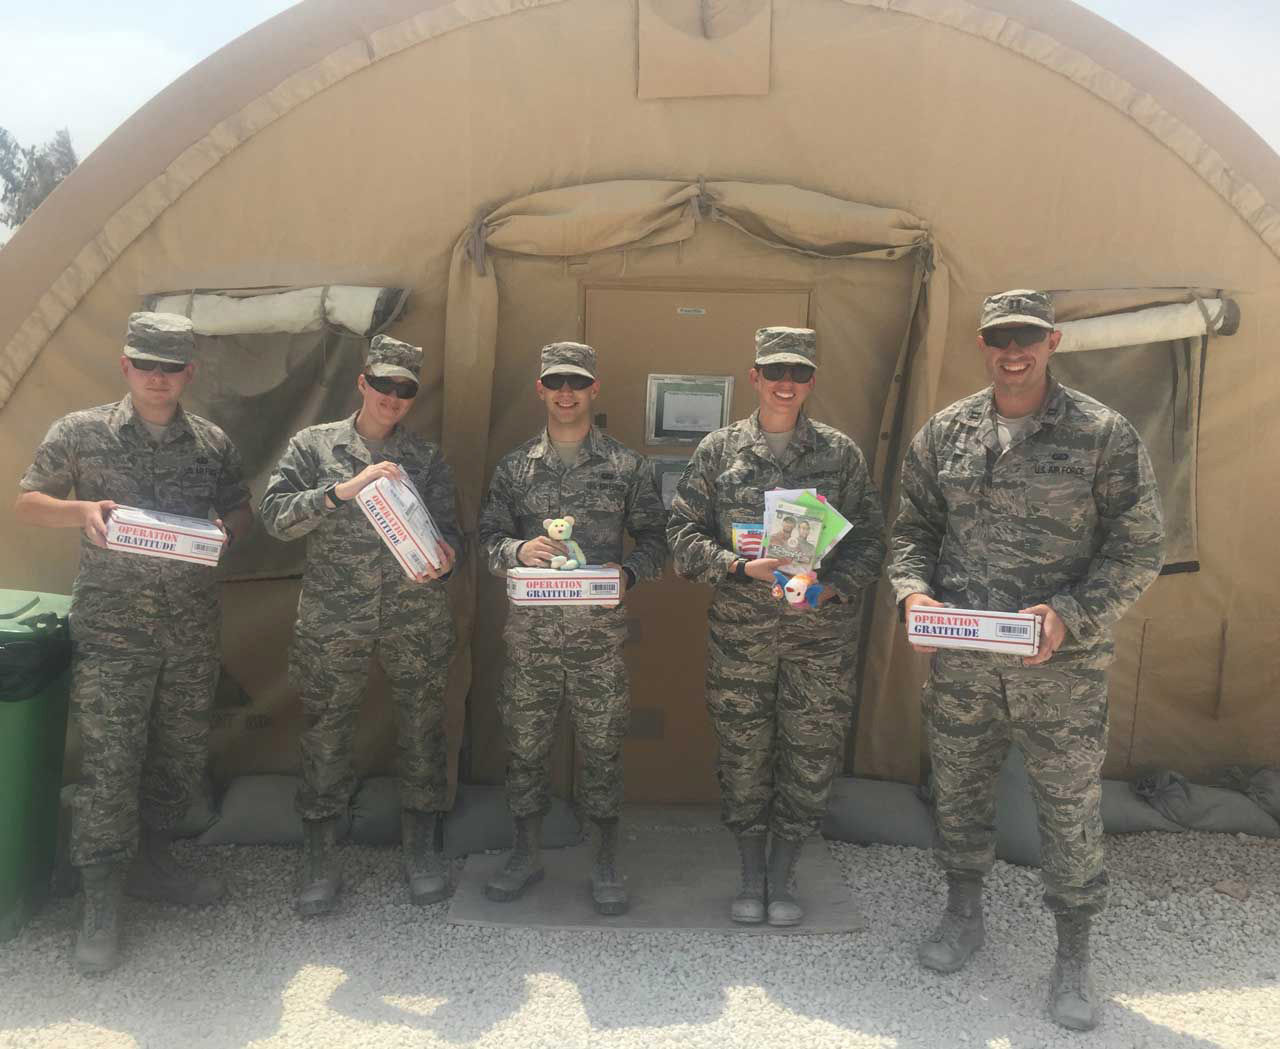 Not only do Kool Smiles dentists send the donated treats, but they also provide dental supplies and the money to cover shipment costs of the care packages. (Courtesy Operation Troop Treats)